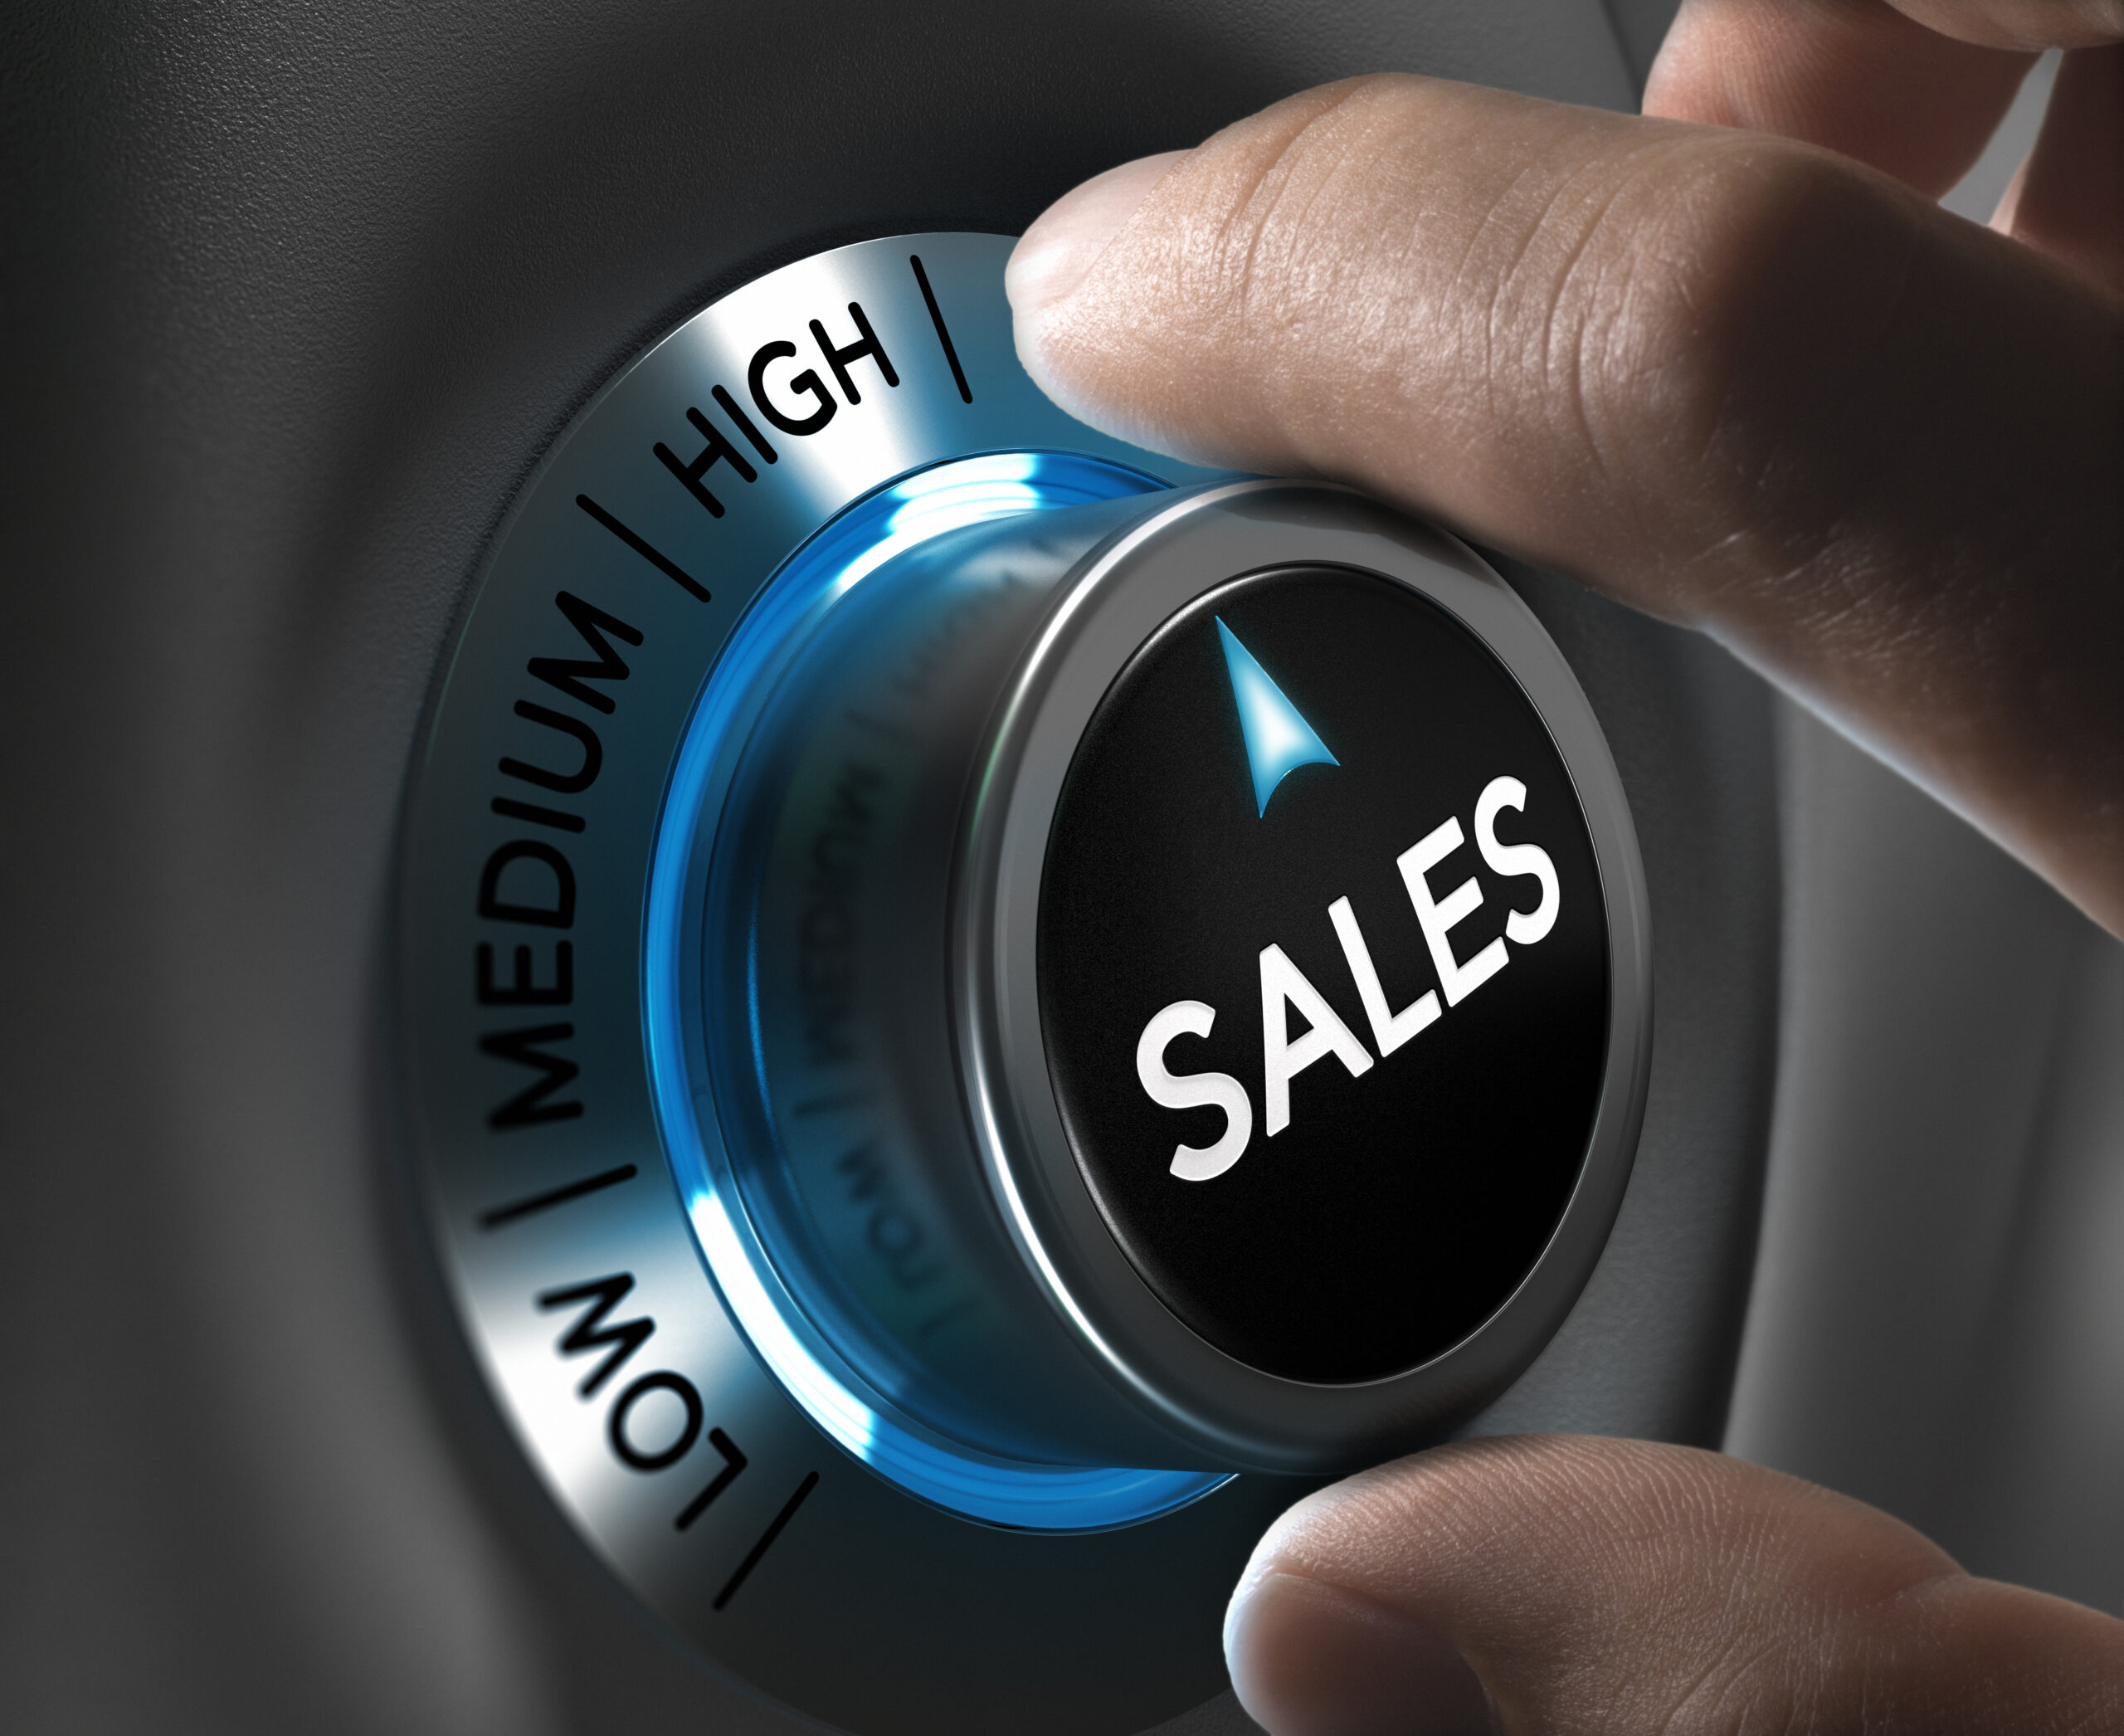 Dialling up sales performance